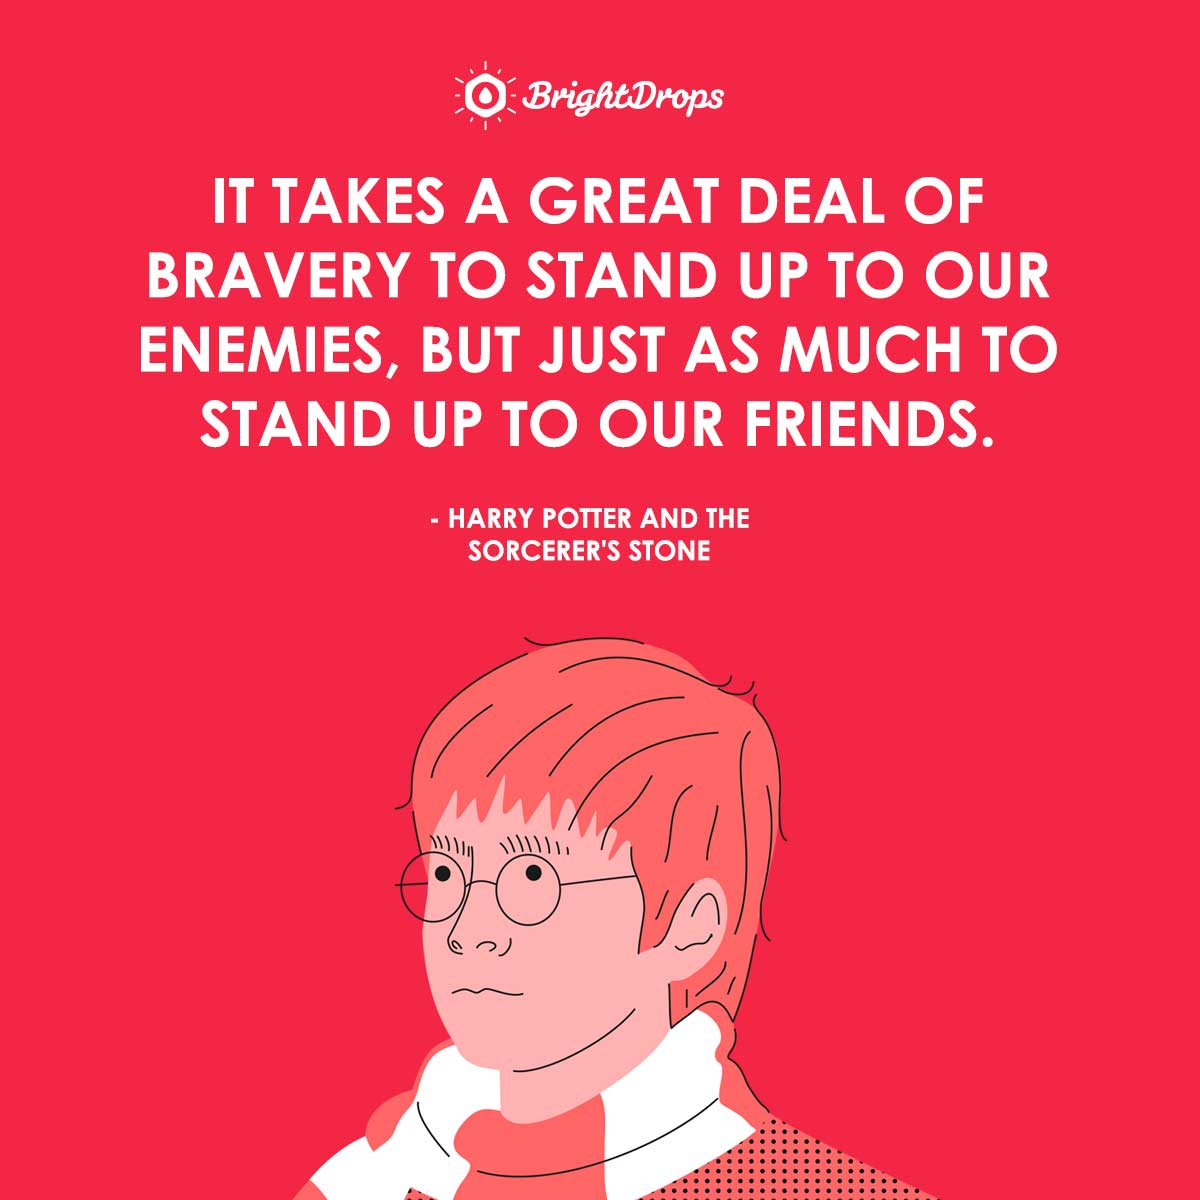 It takes a great deal of bravery to stand up to our enemies, but just as much to stand up to our friends. - Harry Potter and the Sorcerer’s Stone